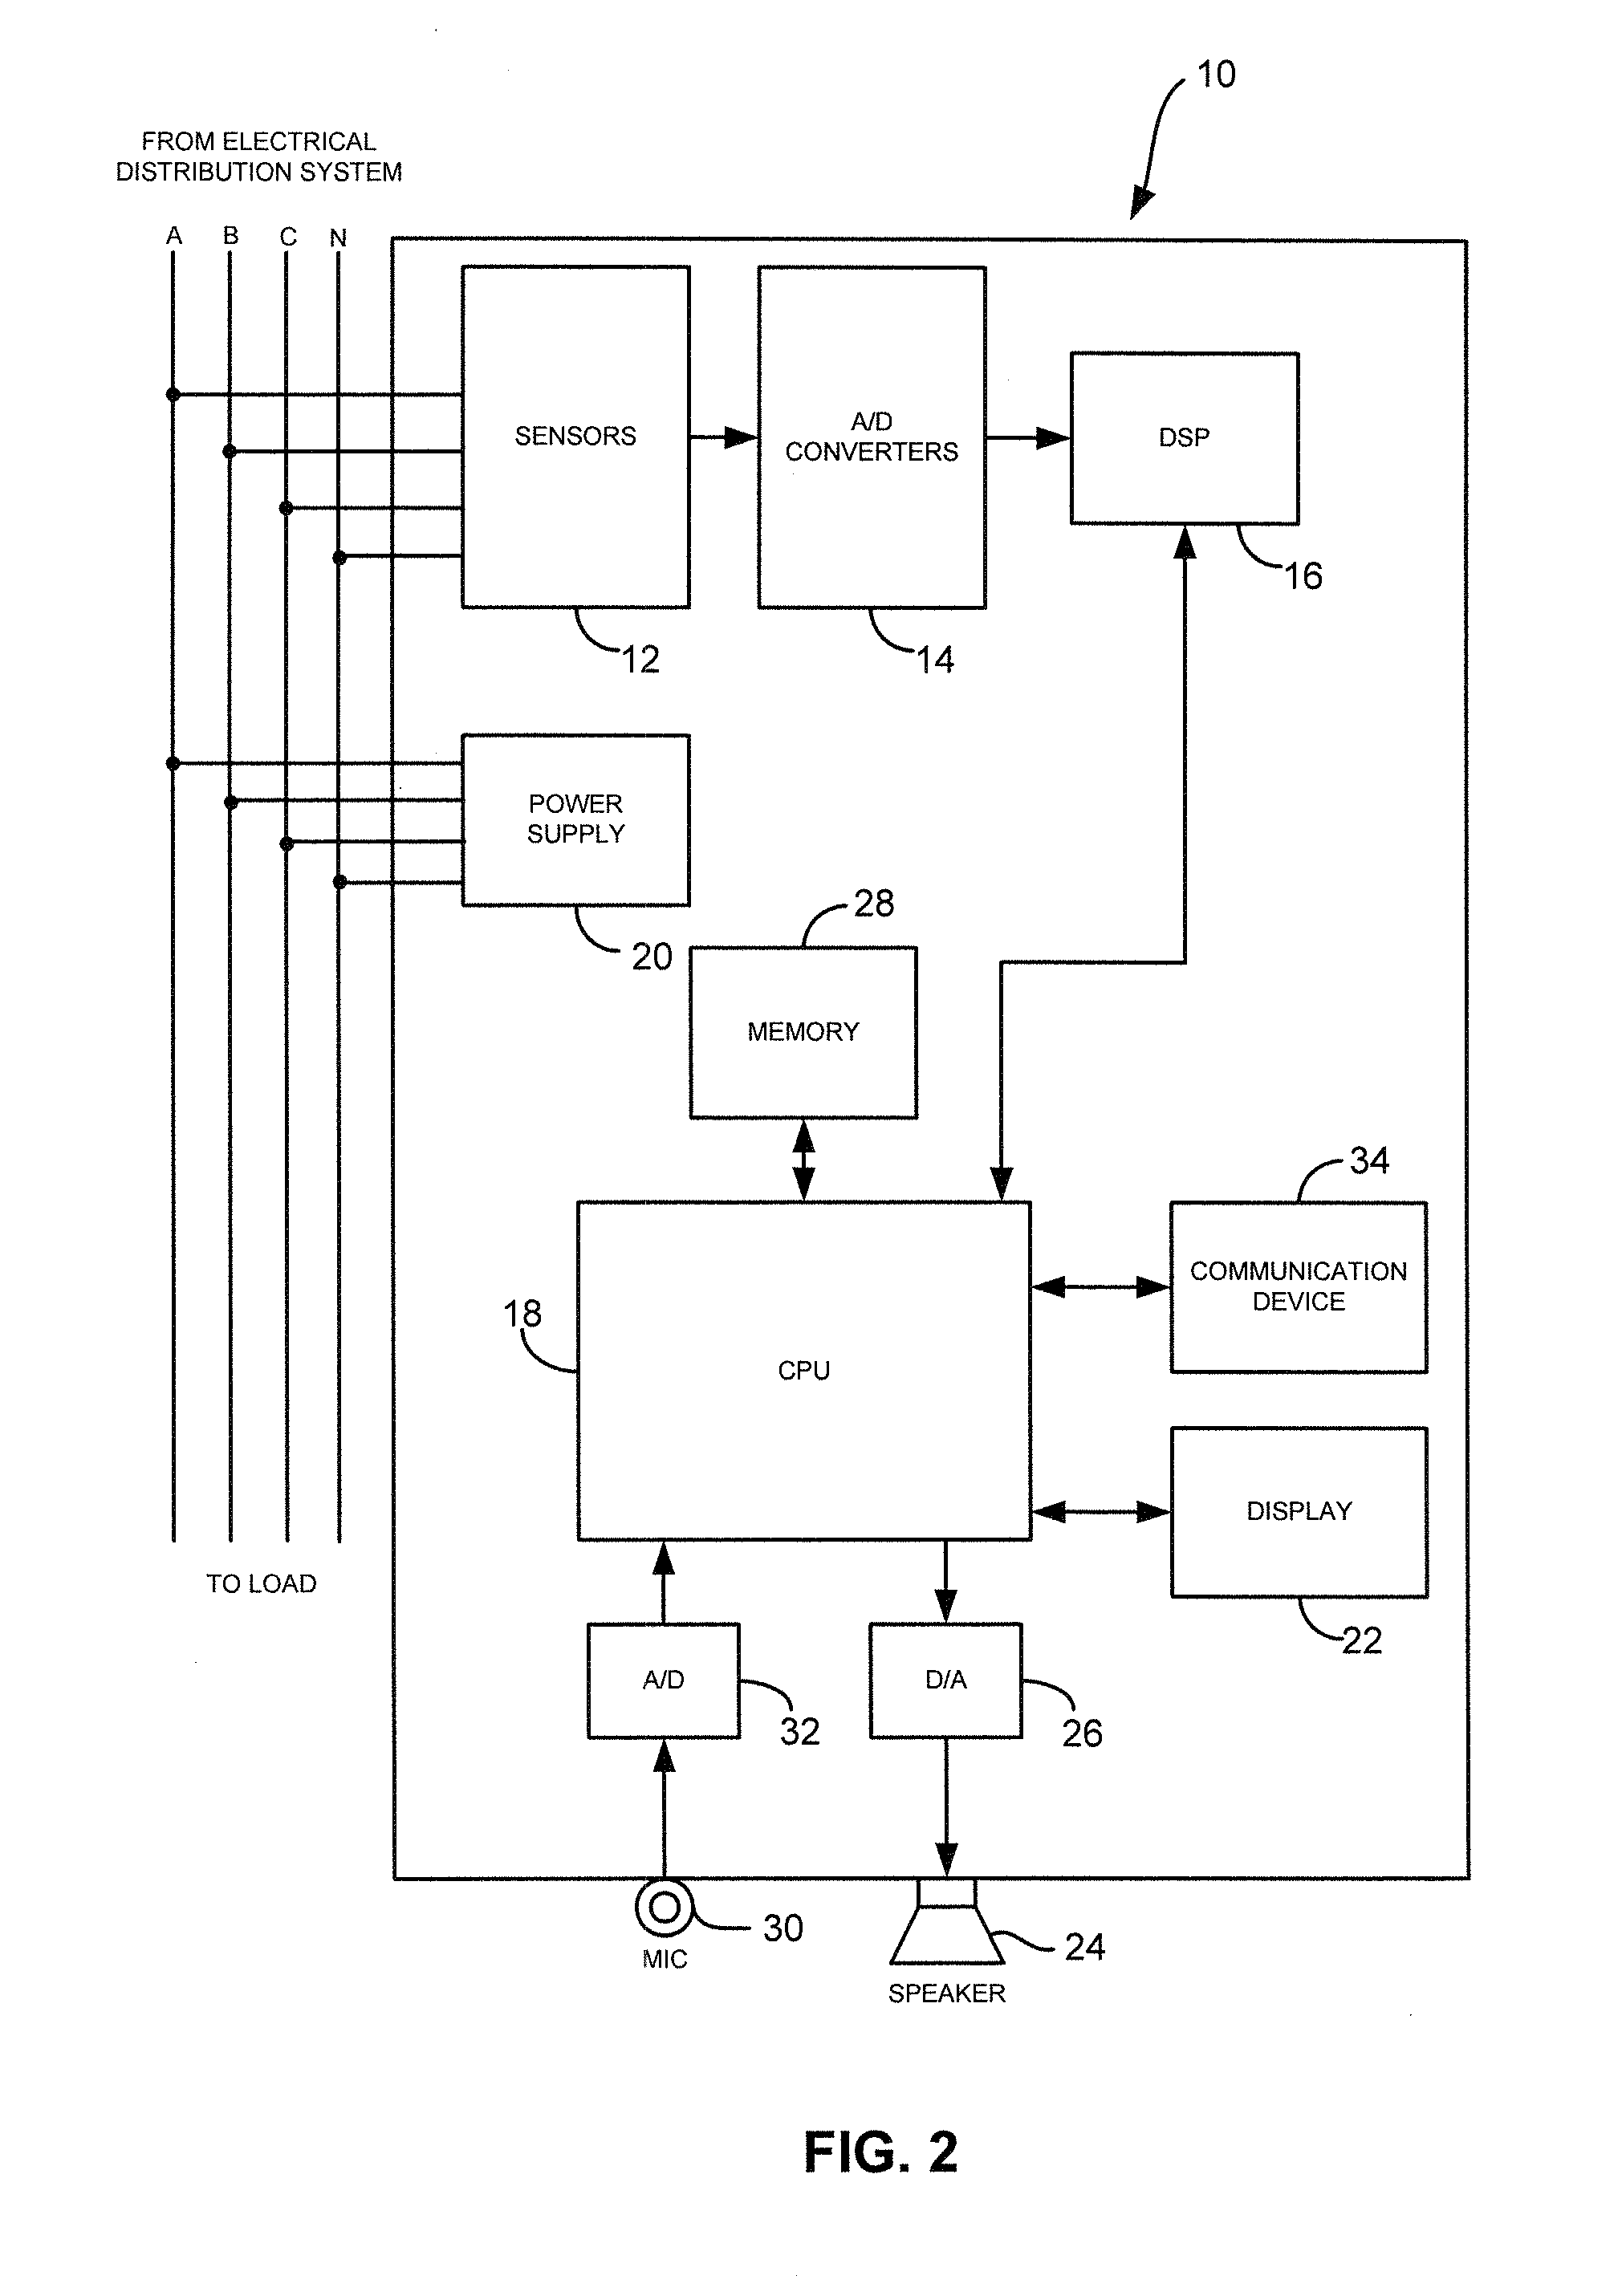 Intelligent electronic device having circuitry for highly accurate voltage sensing